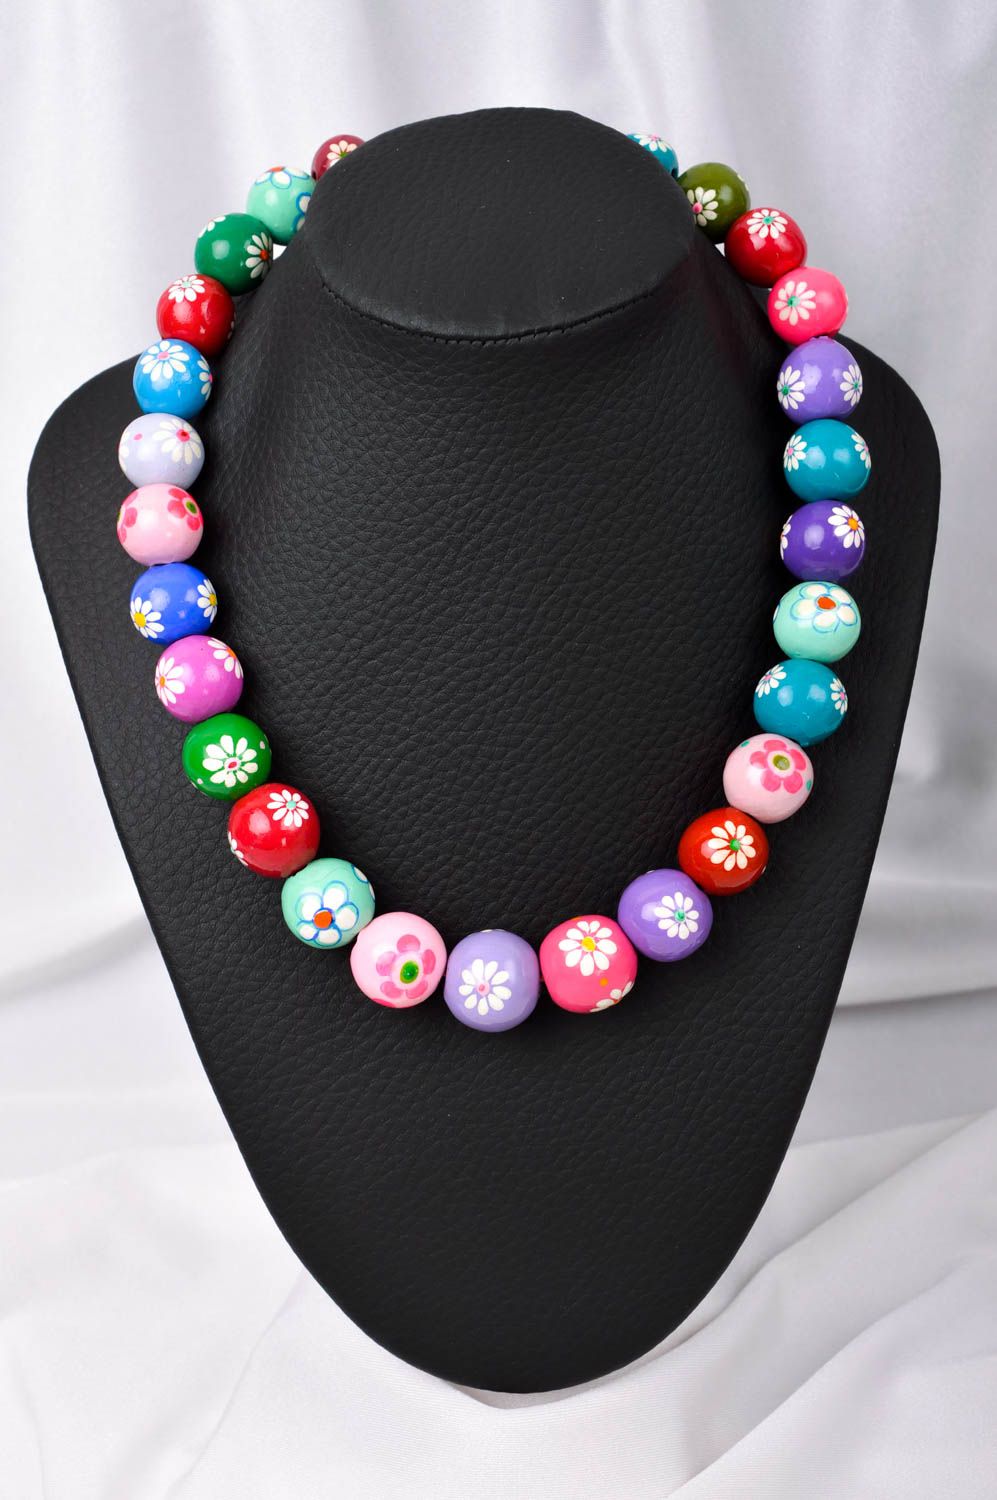 Handmade bead necklace ceramic jewelry designer necklace gifts for women photo 1